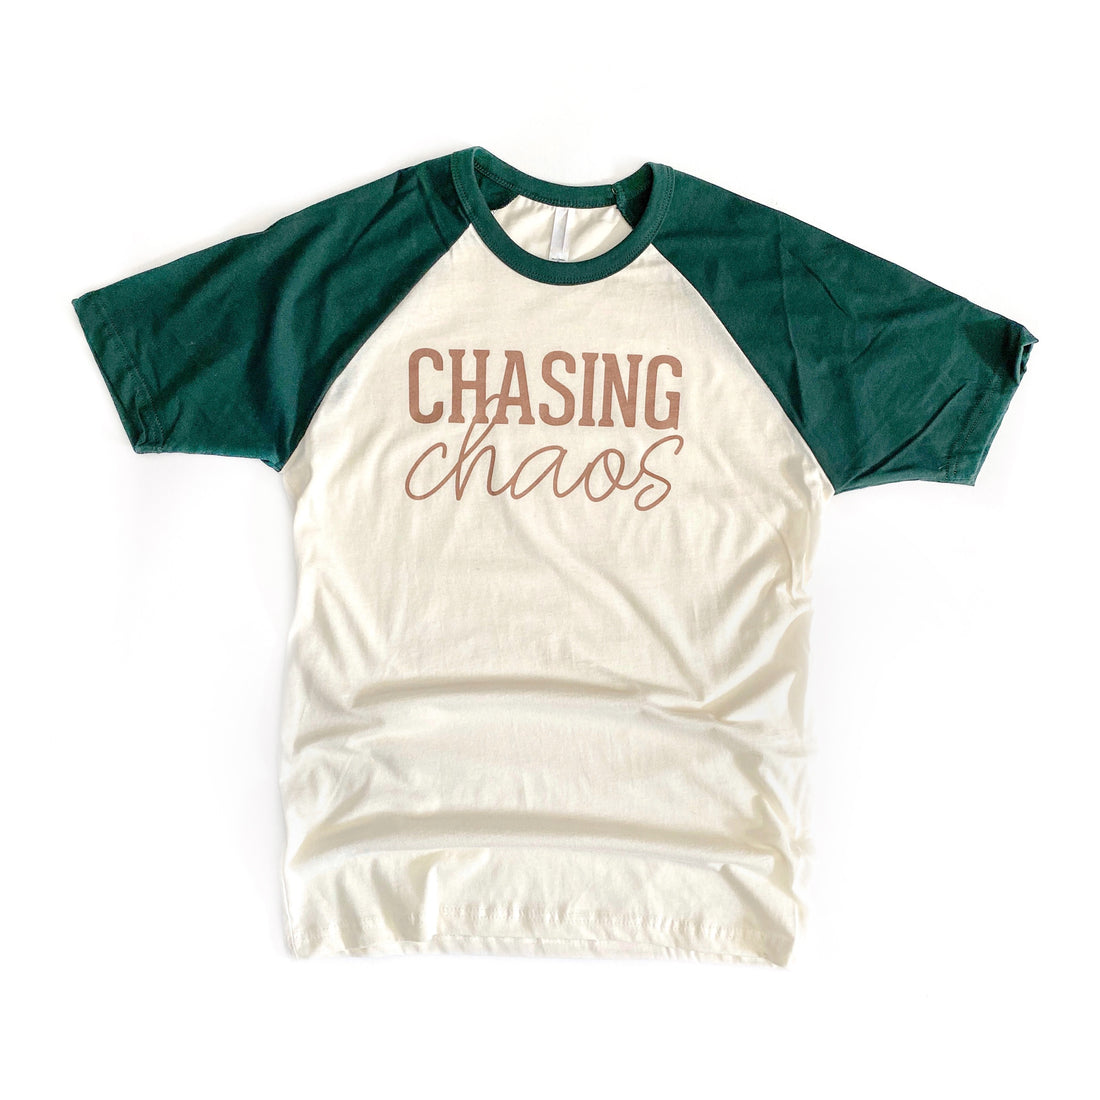 (XS, SM) Chasing Chaos Unisex Tee